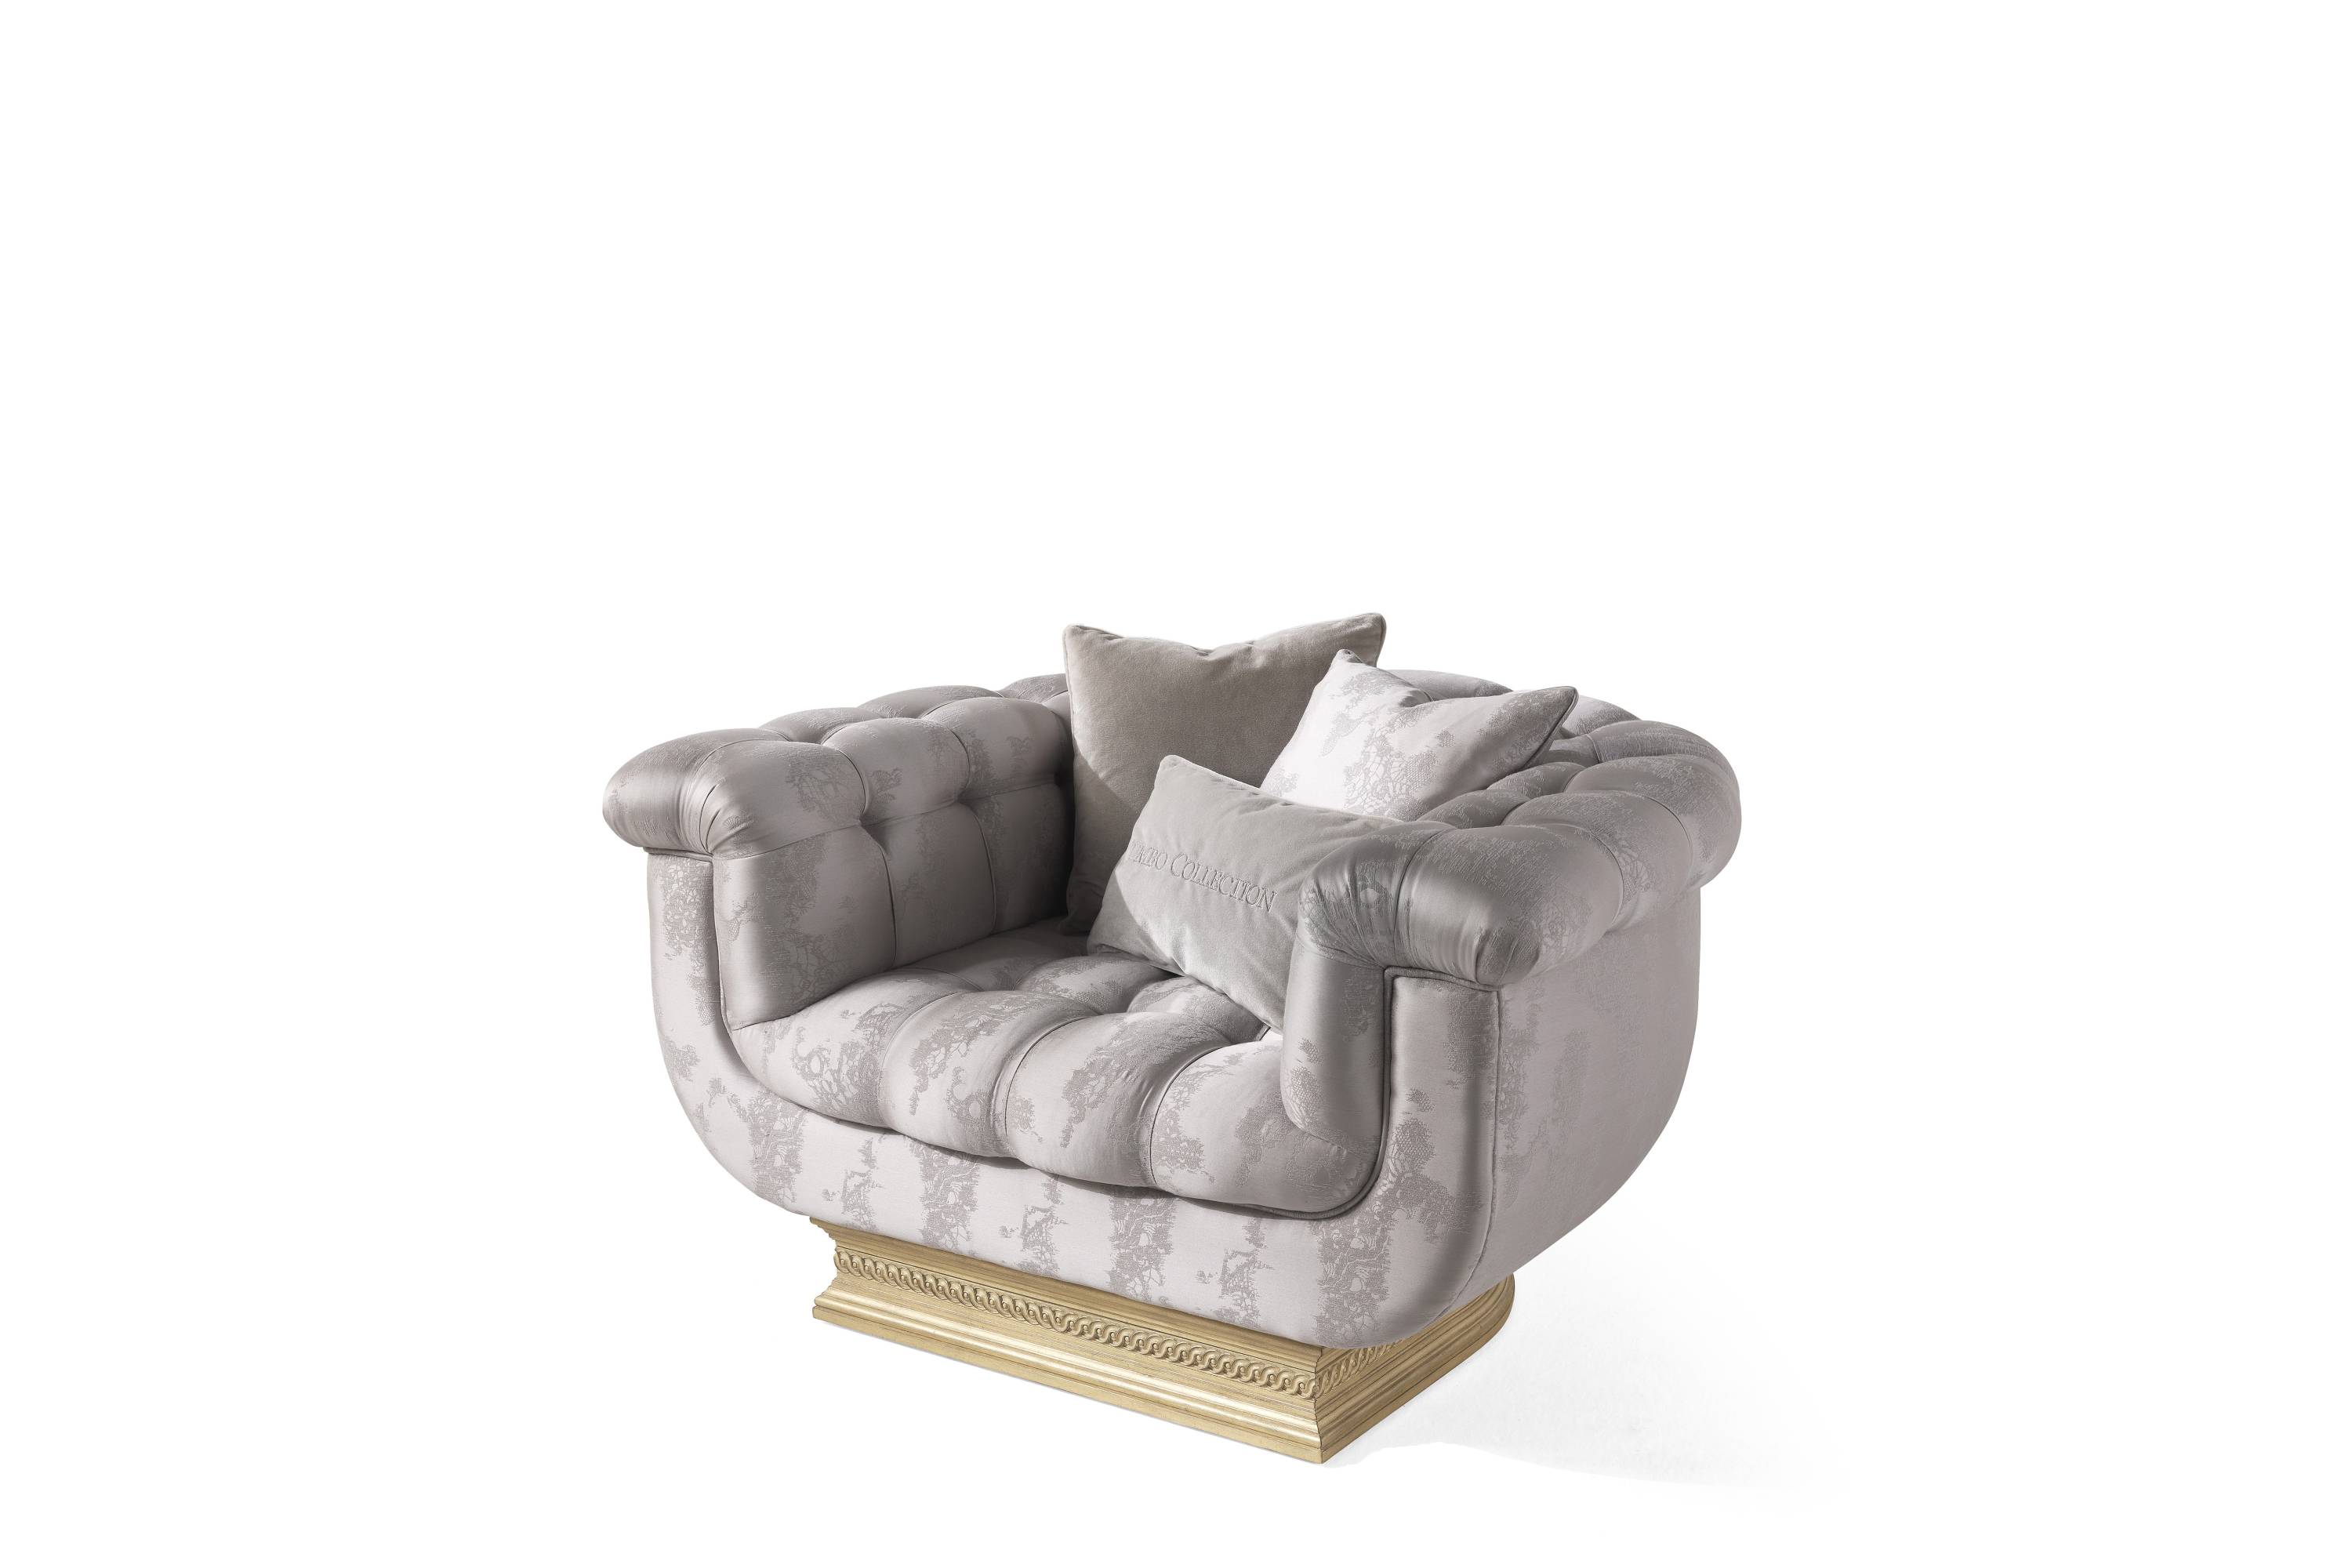 TULIPE armchair - Bespoke projects with luxury Made in Italy classic furniture